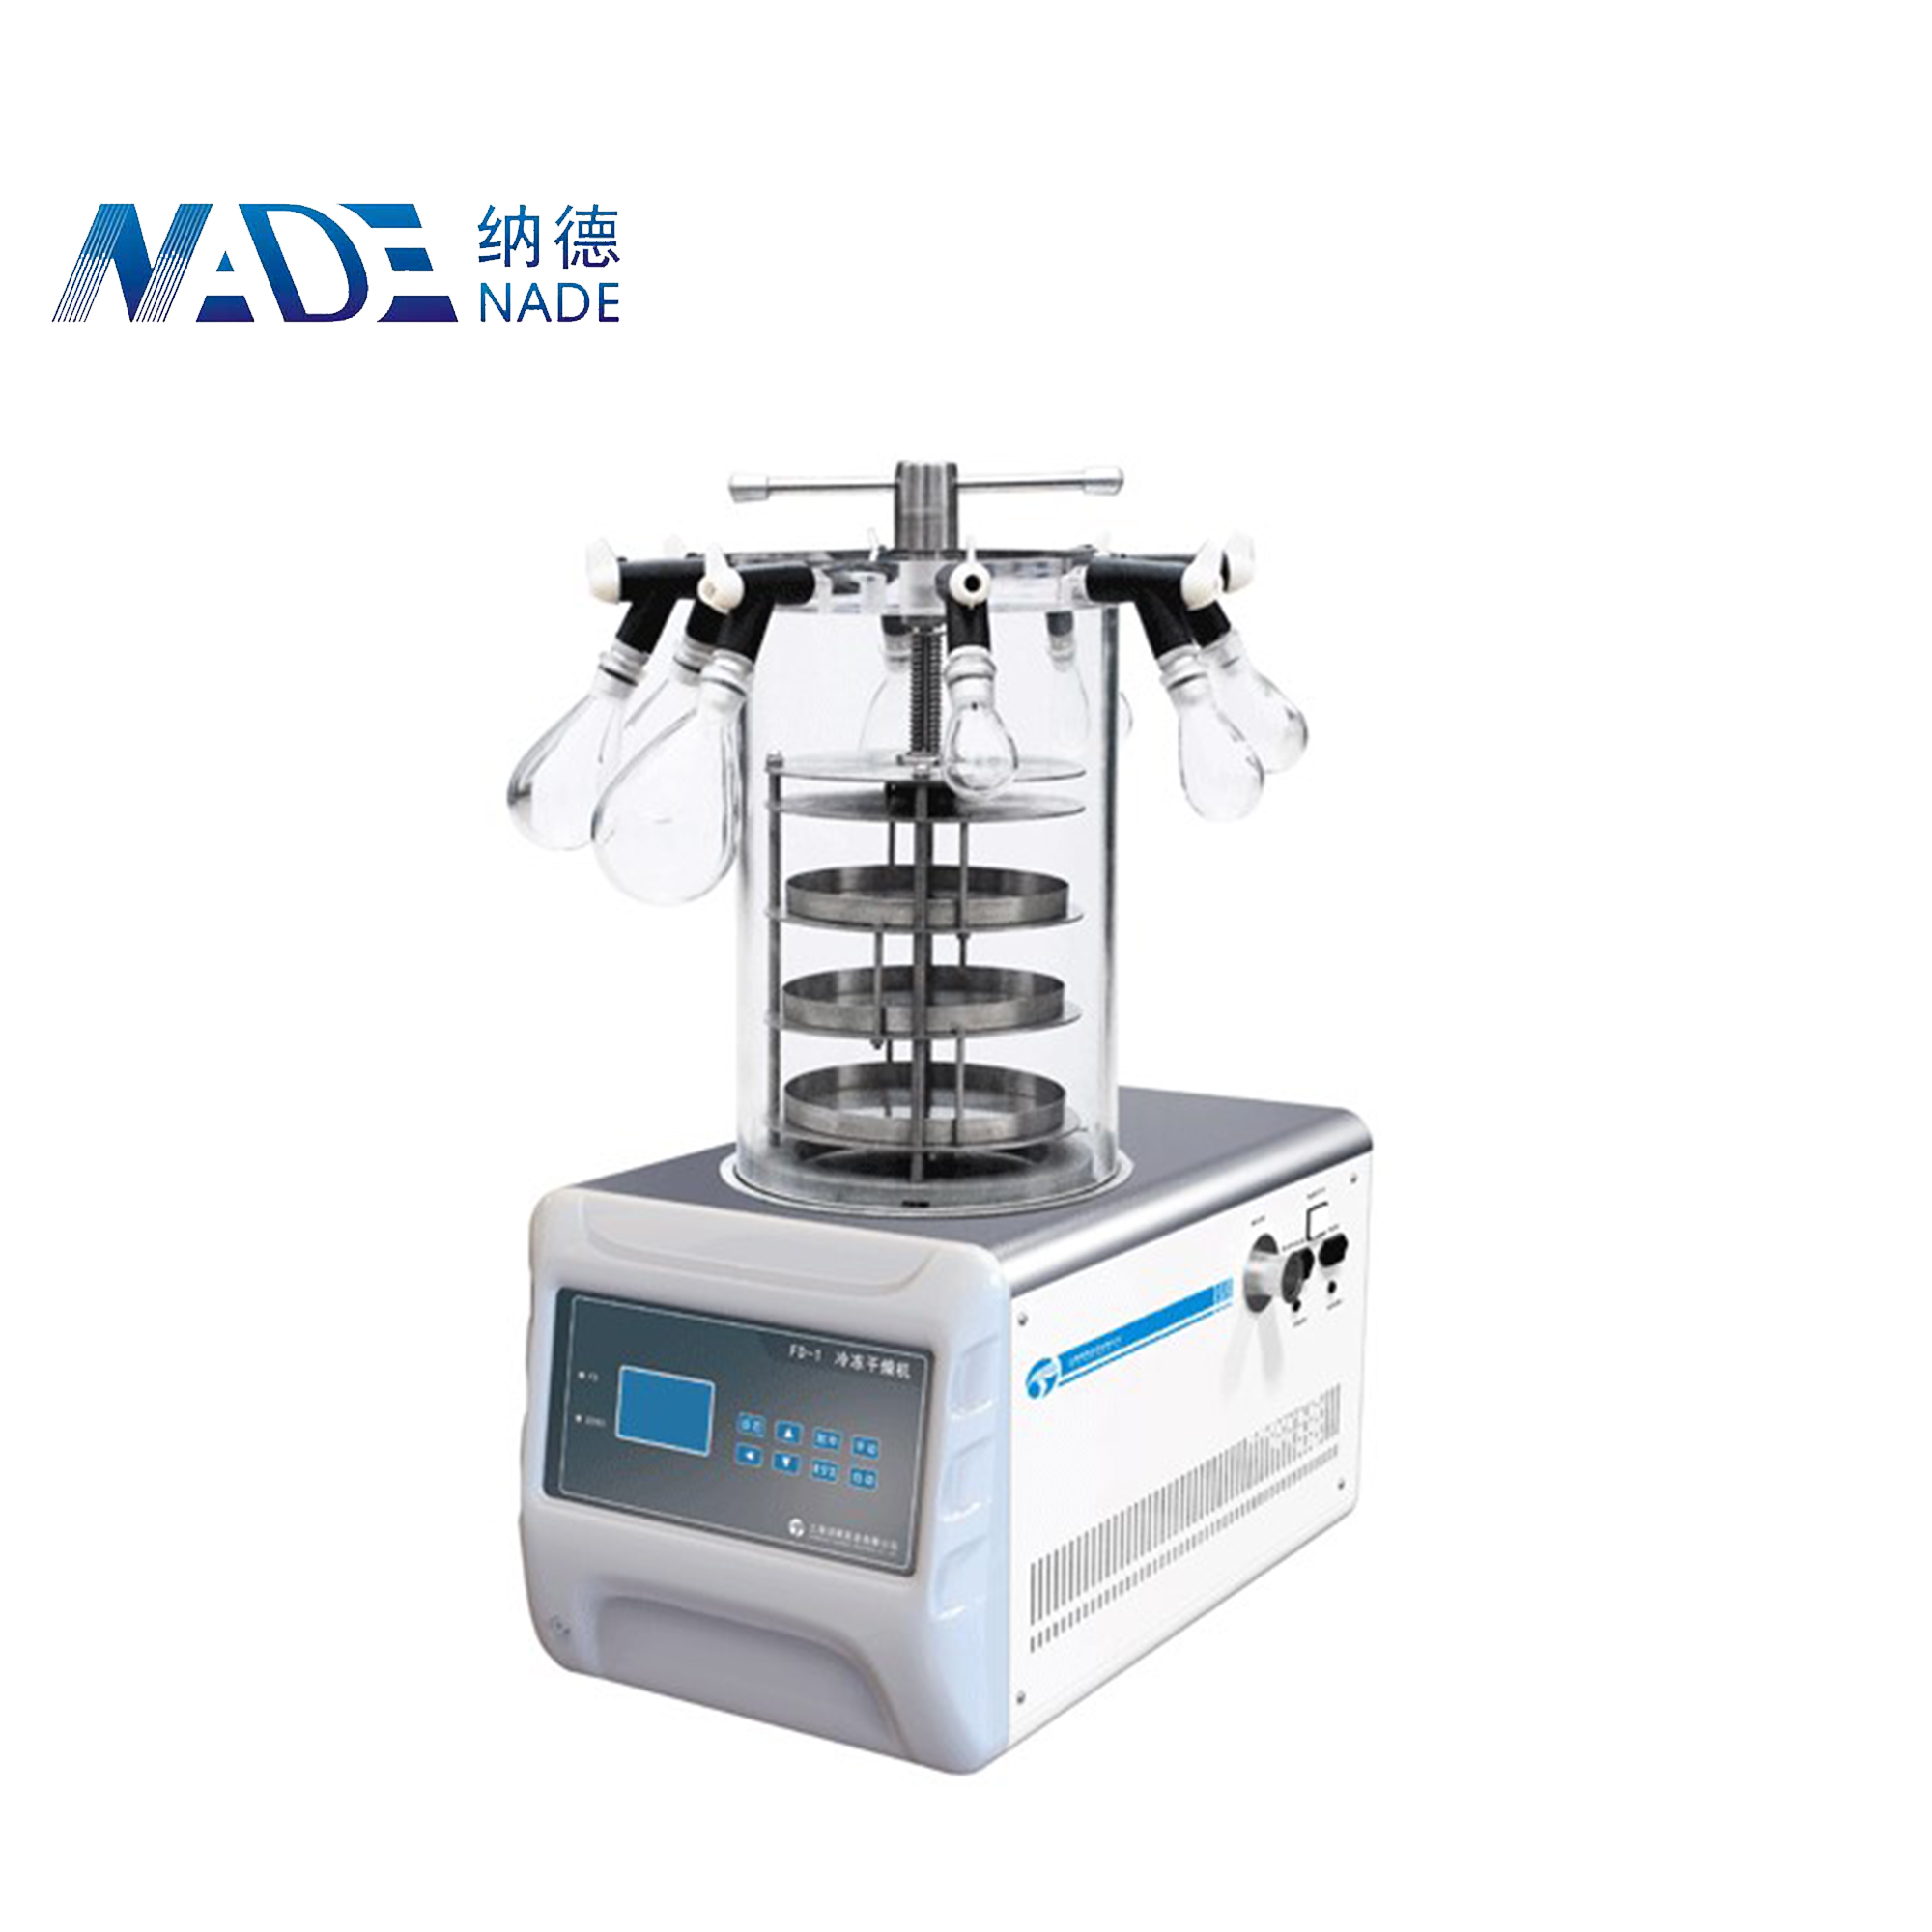 NADE TF-FD-1 Multi-pipeline Top-ptess Laboratory Lyophilizer/freeze drying equipment/freeze dryer